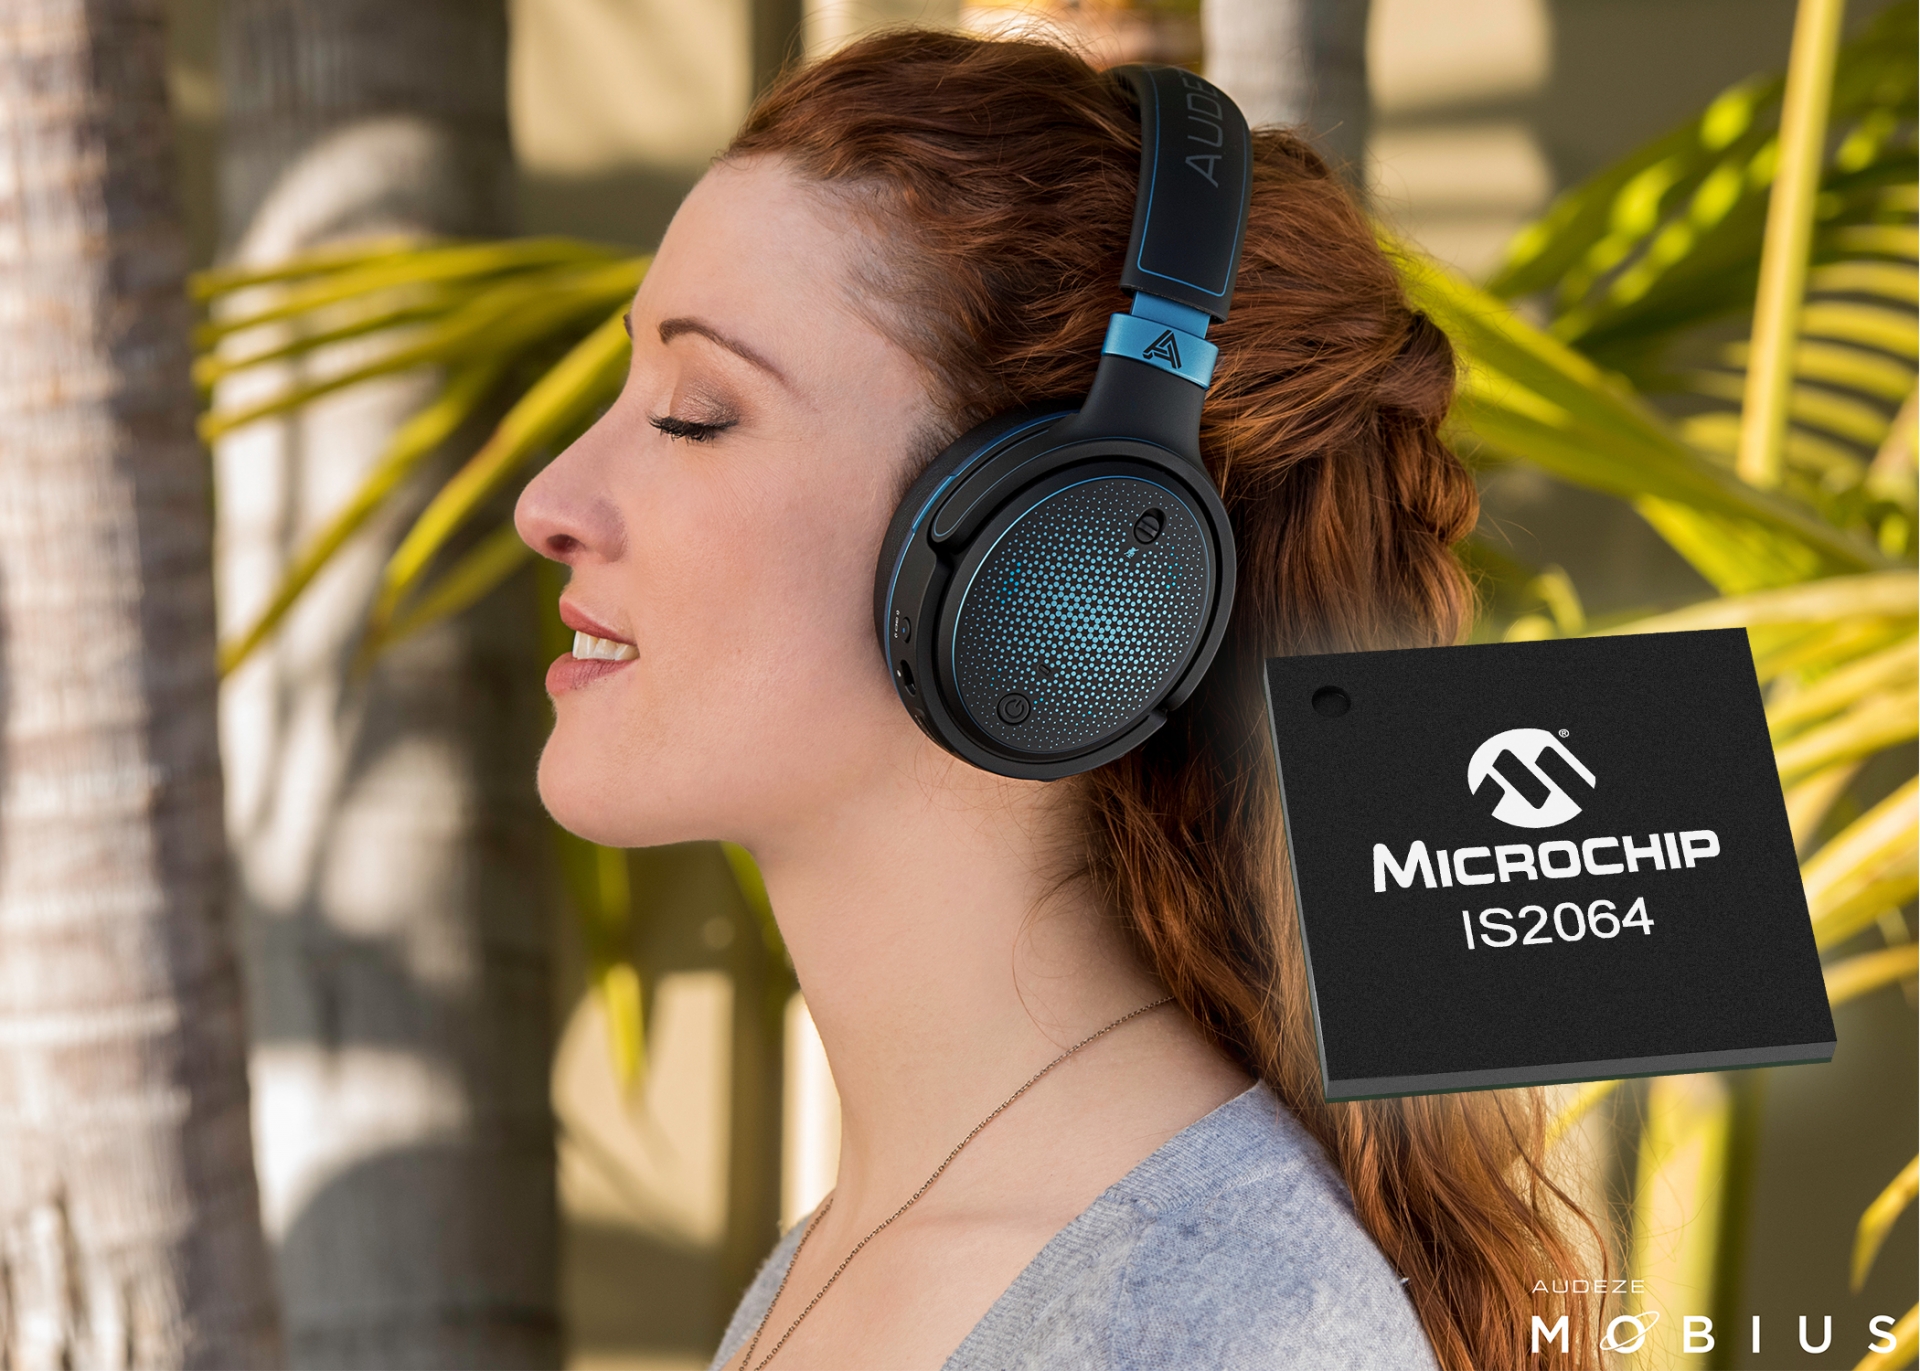 Microchip collaborates with Sony to create high-solution audio devices